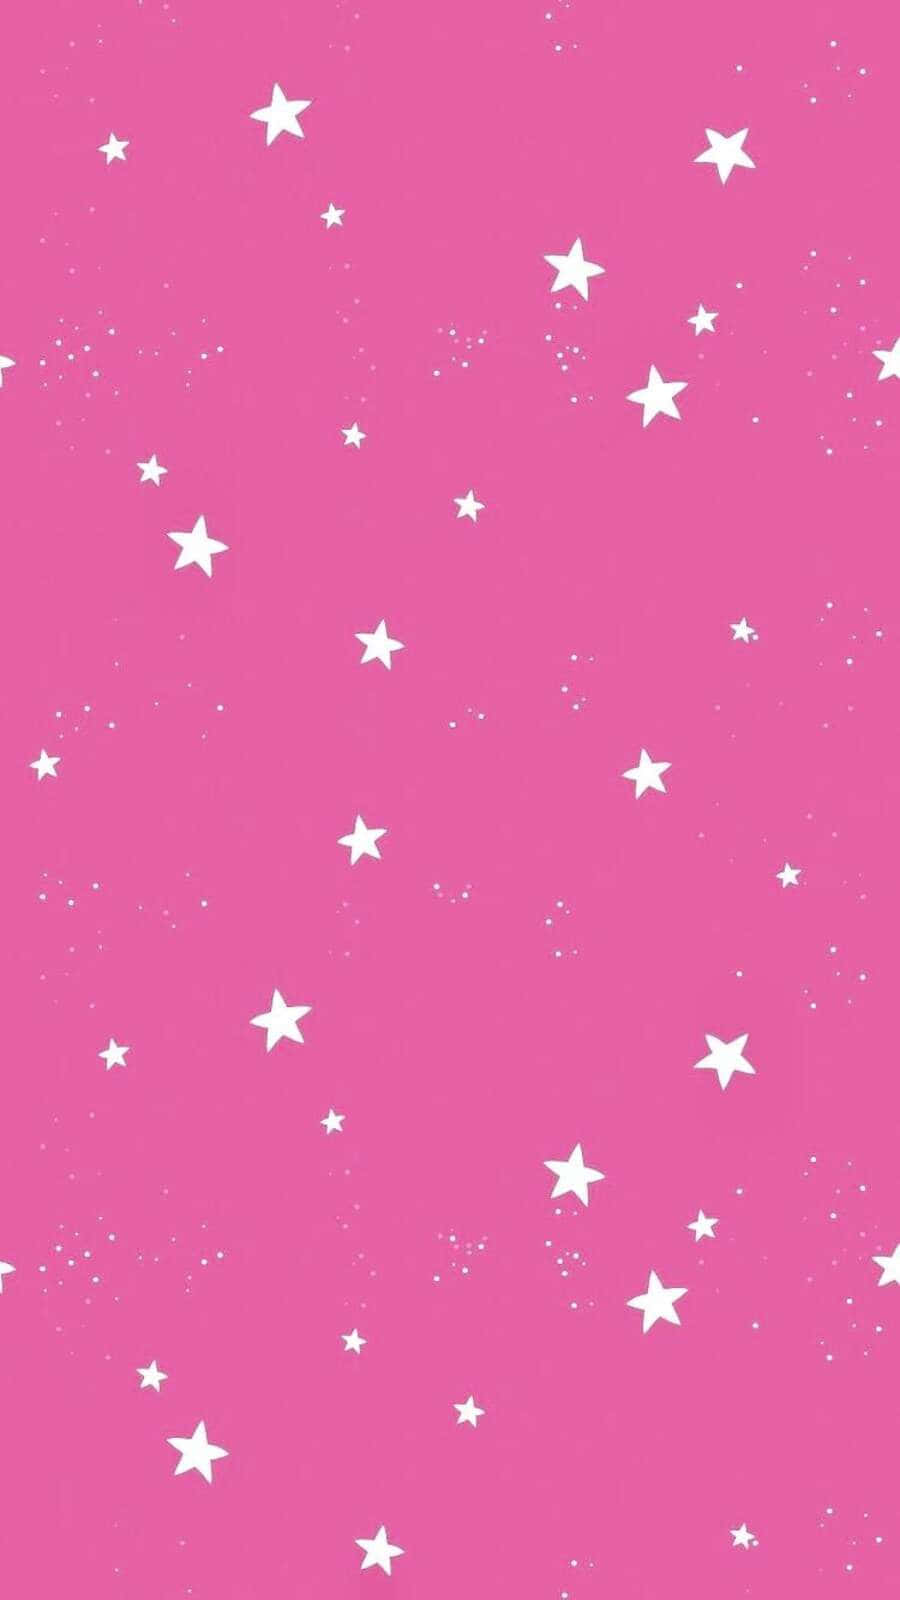 A dazzling display of pink stars in the night sky Wallpaper